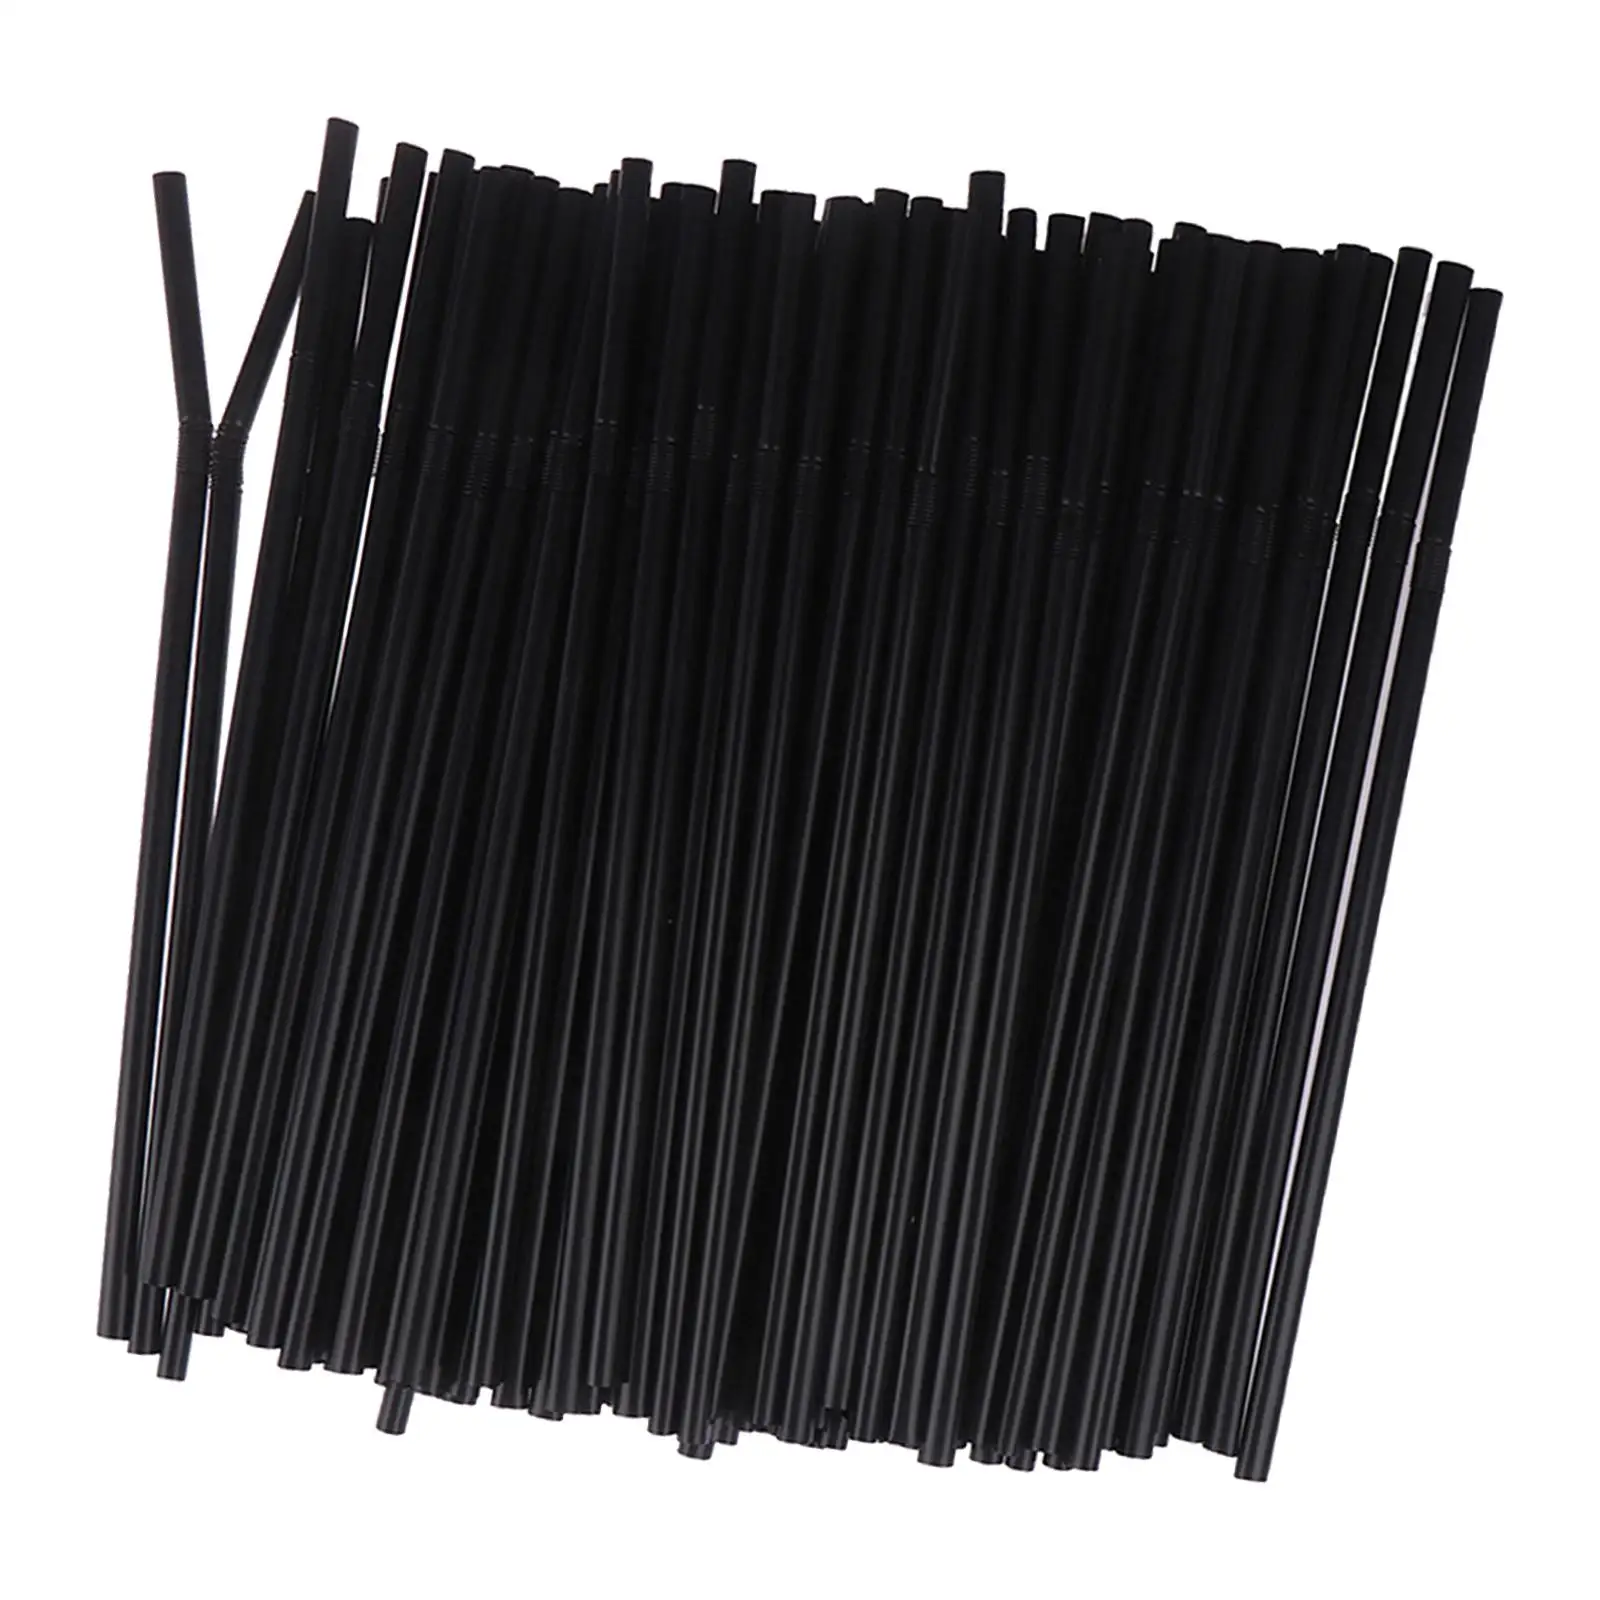 200Pcs Portable Curved Drinking Straws Disposable for Parties